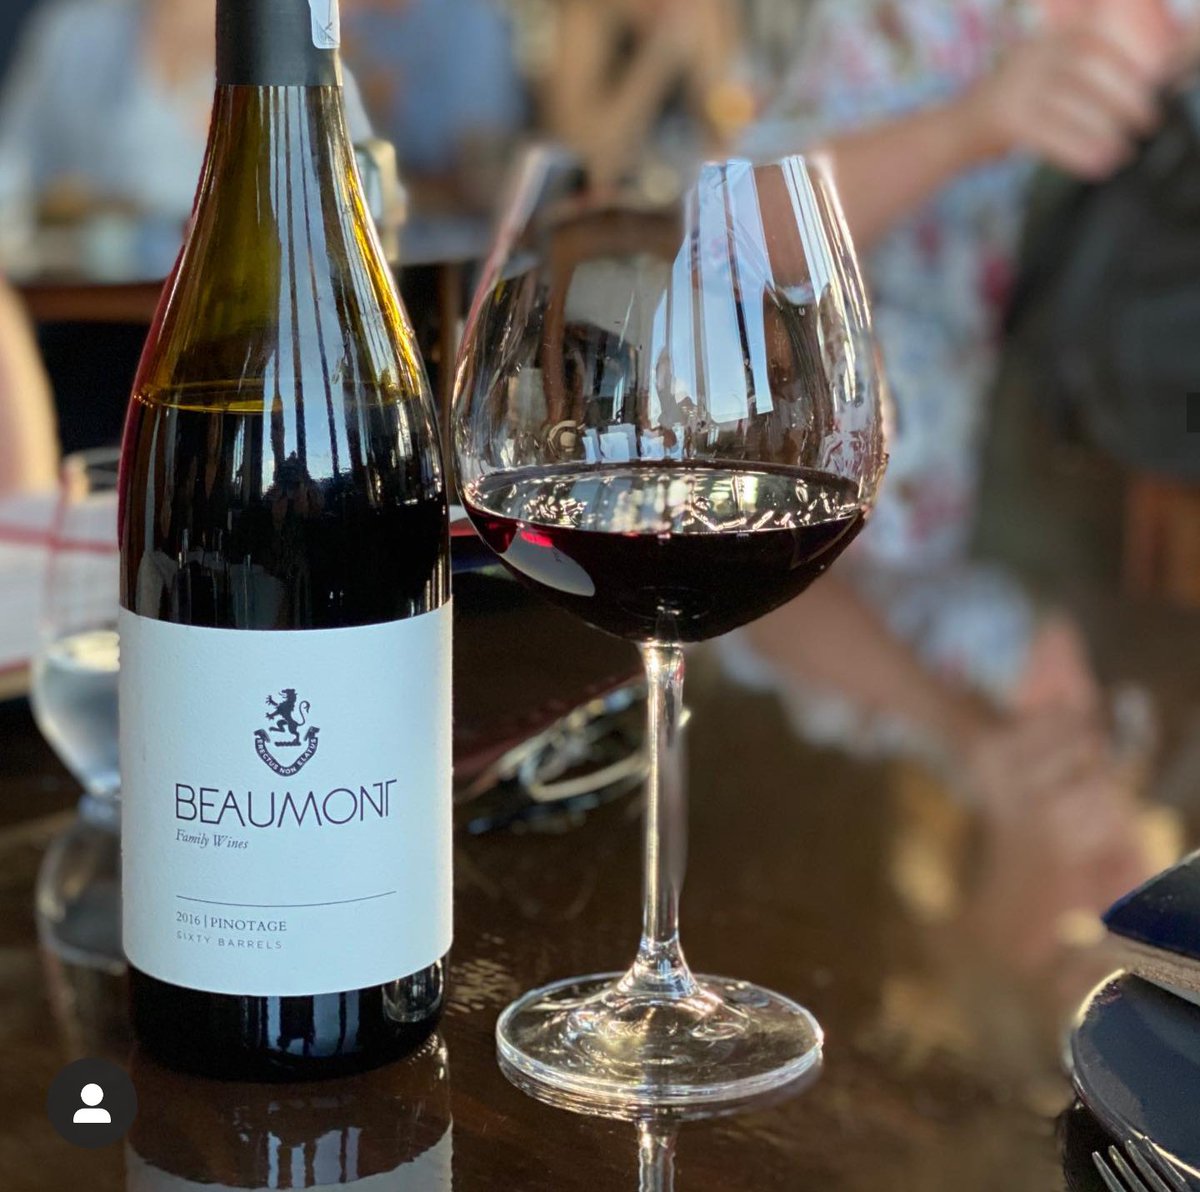 The Pinotage 2017 is an expression of our style but we only have 28 barrels vs 60 barrels in the 2016. The concentration in the wine is due to the 46 year old vines only producing 2.5 tons/ha & 2017 is one of those great vintages here at Beaumont. (📷): @n20winery